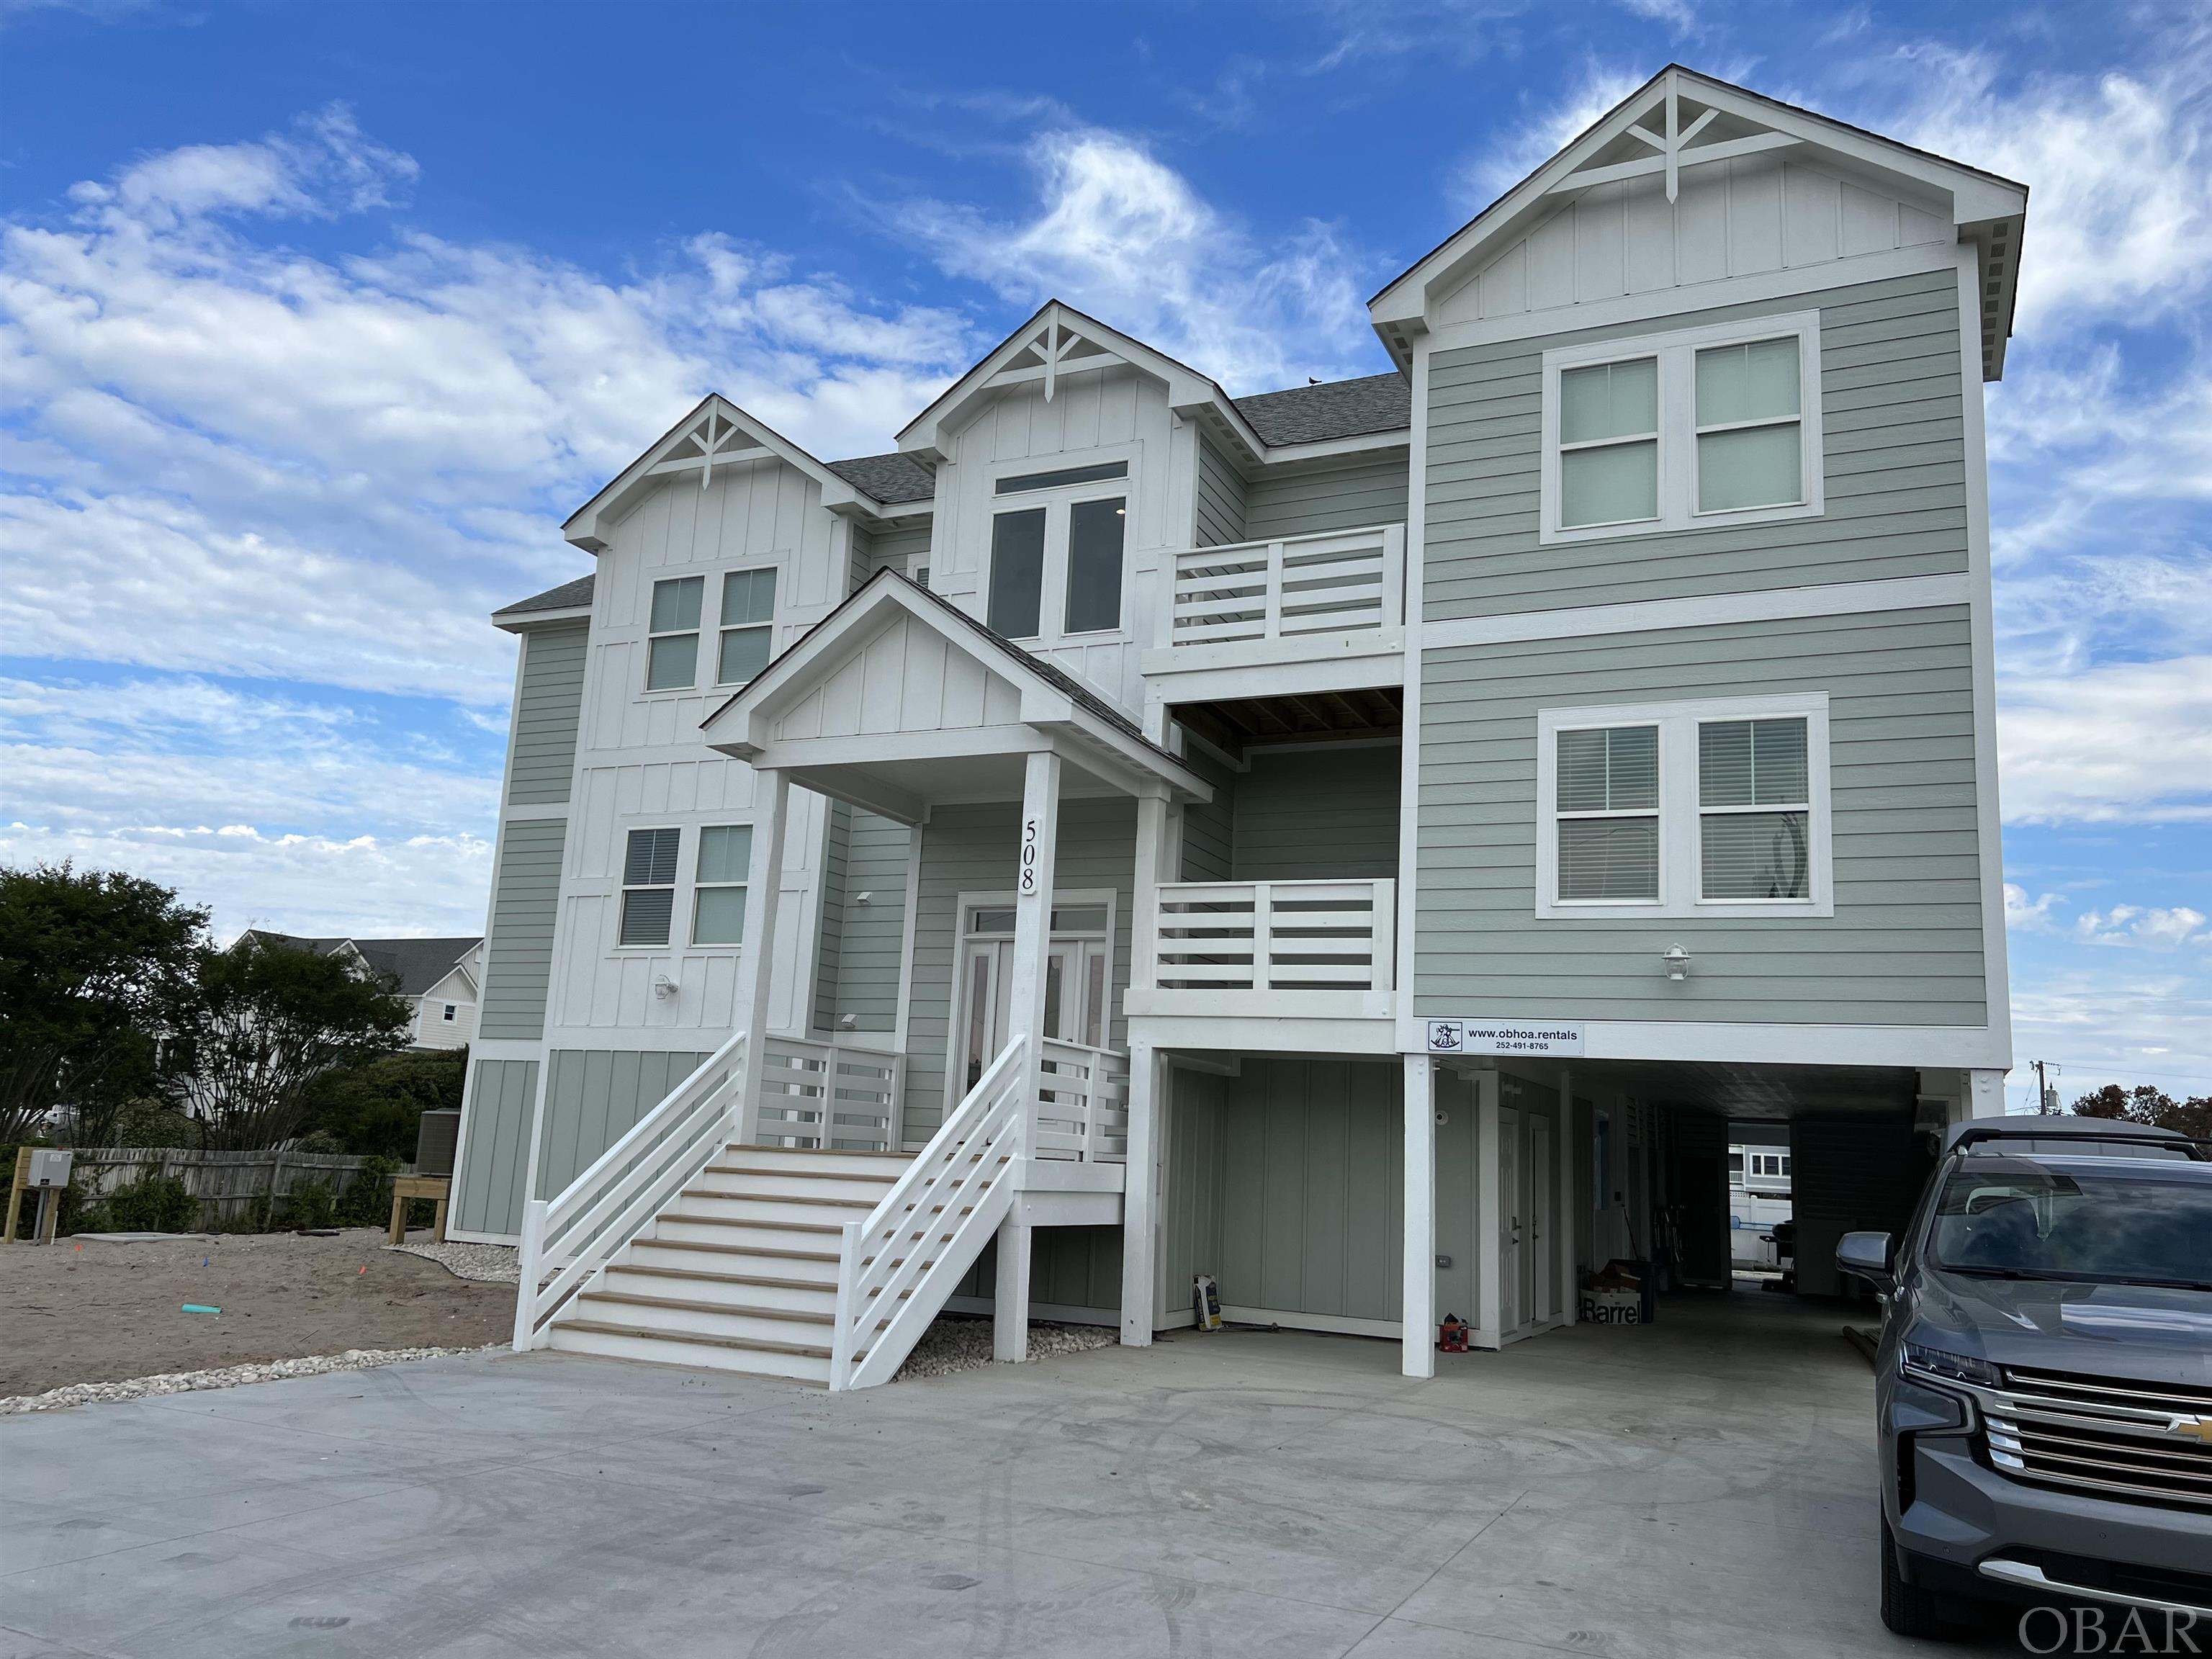 Spectacular brand new nine bedroom home in Ocean Sands Section B; brand new for 2022 season, ready end of May.  Estate size lot just steps to the beach access.  Elevator access to all levels. All of the nine bedrooms have private ensuite baths. Check the surf from the ocean views on the top floor.  Beach access is less than thirty second walk. This house will be a top producing rental with all of the amenities for discerning guests. High quality composite smart board exterior siding with custom trim. Interior is custom trim with high end furnishings. Loaded with extras. Smart home wired throughout; locks, thermostats, Sonos sound system with speakers inside and out, all Samsung Smart televisions. Two tankless gas hot water heaters.  Three level home, the ground floor has elevator access, full bath, large rec room with wet bar and full size counter depth refrigerator, plus theatre room. Second level has six total bedrooms three kings, one queen and two custom built in bunks rooms, each with two twins over two fulls for a total of eight beds between the two bunk rooms. All bedrooms with private ensuite baths.  All with private decks or access to shared deck overlooking the pool area, except bunk rooms.  Double laundry room (two washers/two dryers).   Top floor has another three king masters with ocean views, private baths and walk out covered deck.  Sitting area and powder room.  Kitchen has stainless steel appliances, coffee bar, 36" gas range with commercial hood; two dishwashers, two full size counter depth refrigerators.  Adjacent dining with seating for 20 at the tables and another seven at the large island. Multiple covered decks provide shade and a great spot to sit and enjoy a meal. Large private custom concrete heated pool, vinyl fenced with large turf lounge area, poolside television, and area with covered shaded tiki bar with bar sink.  Hot tub in pool area along with outside bath including toilet and outside shower.  No detail has been over looked in this house.  House will convey with a required two year management agreement with OBHOA, LLC.